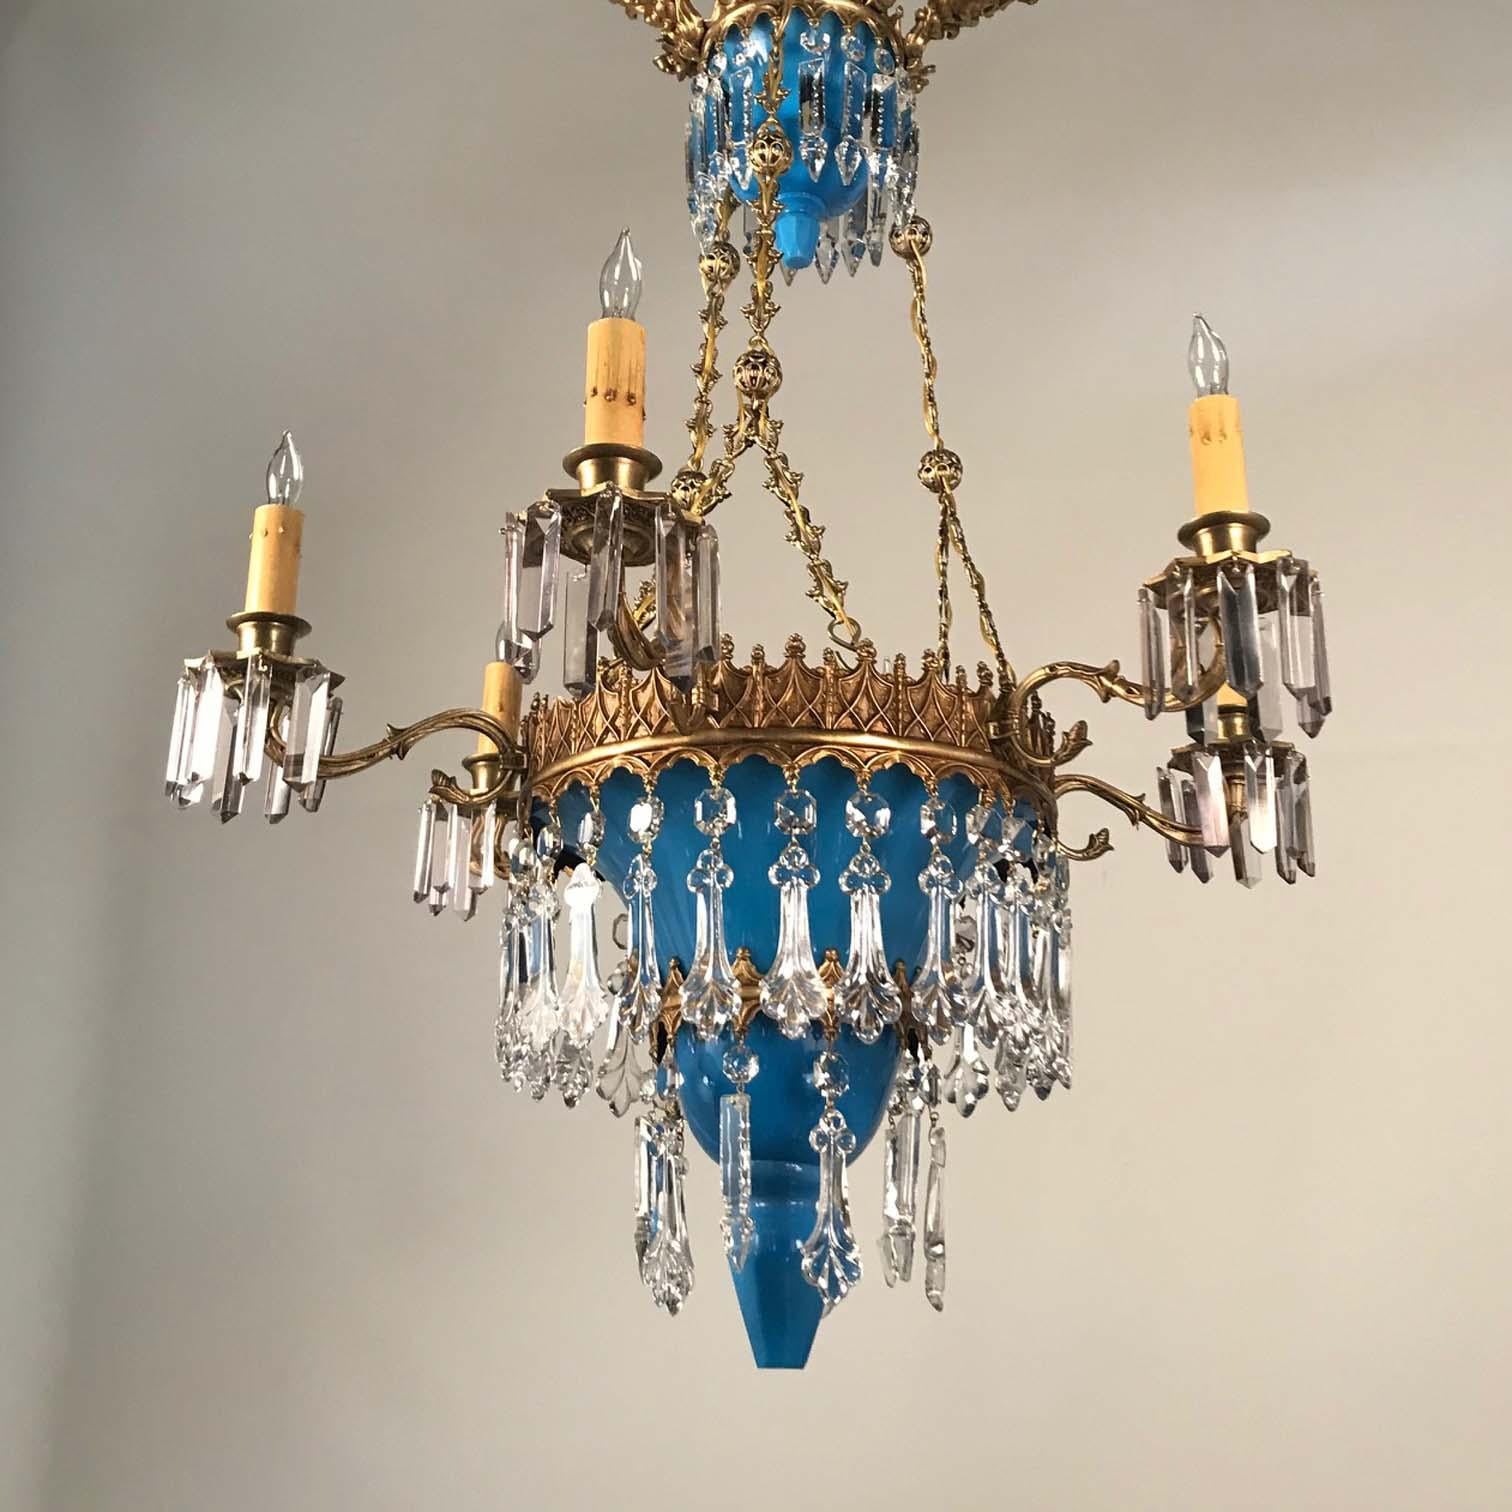 This fine French chandelier brings the best to your home. From the gilt bronze crisply cast canopy, to the cut blue glass pendant below, it demonstrates the good taste and quality for which Baccarat is renowned but cannot be definitively attributed